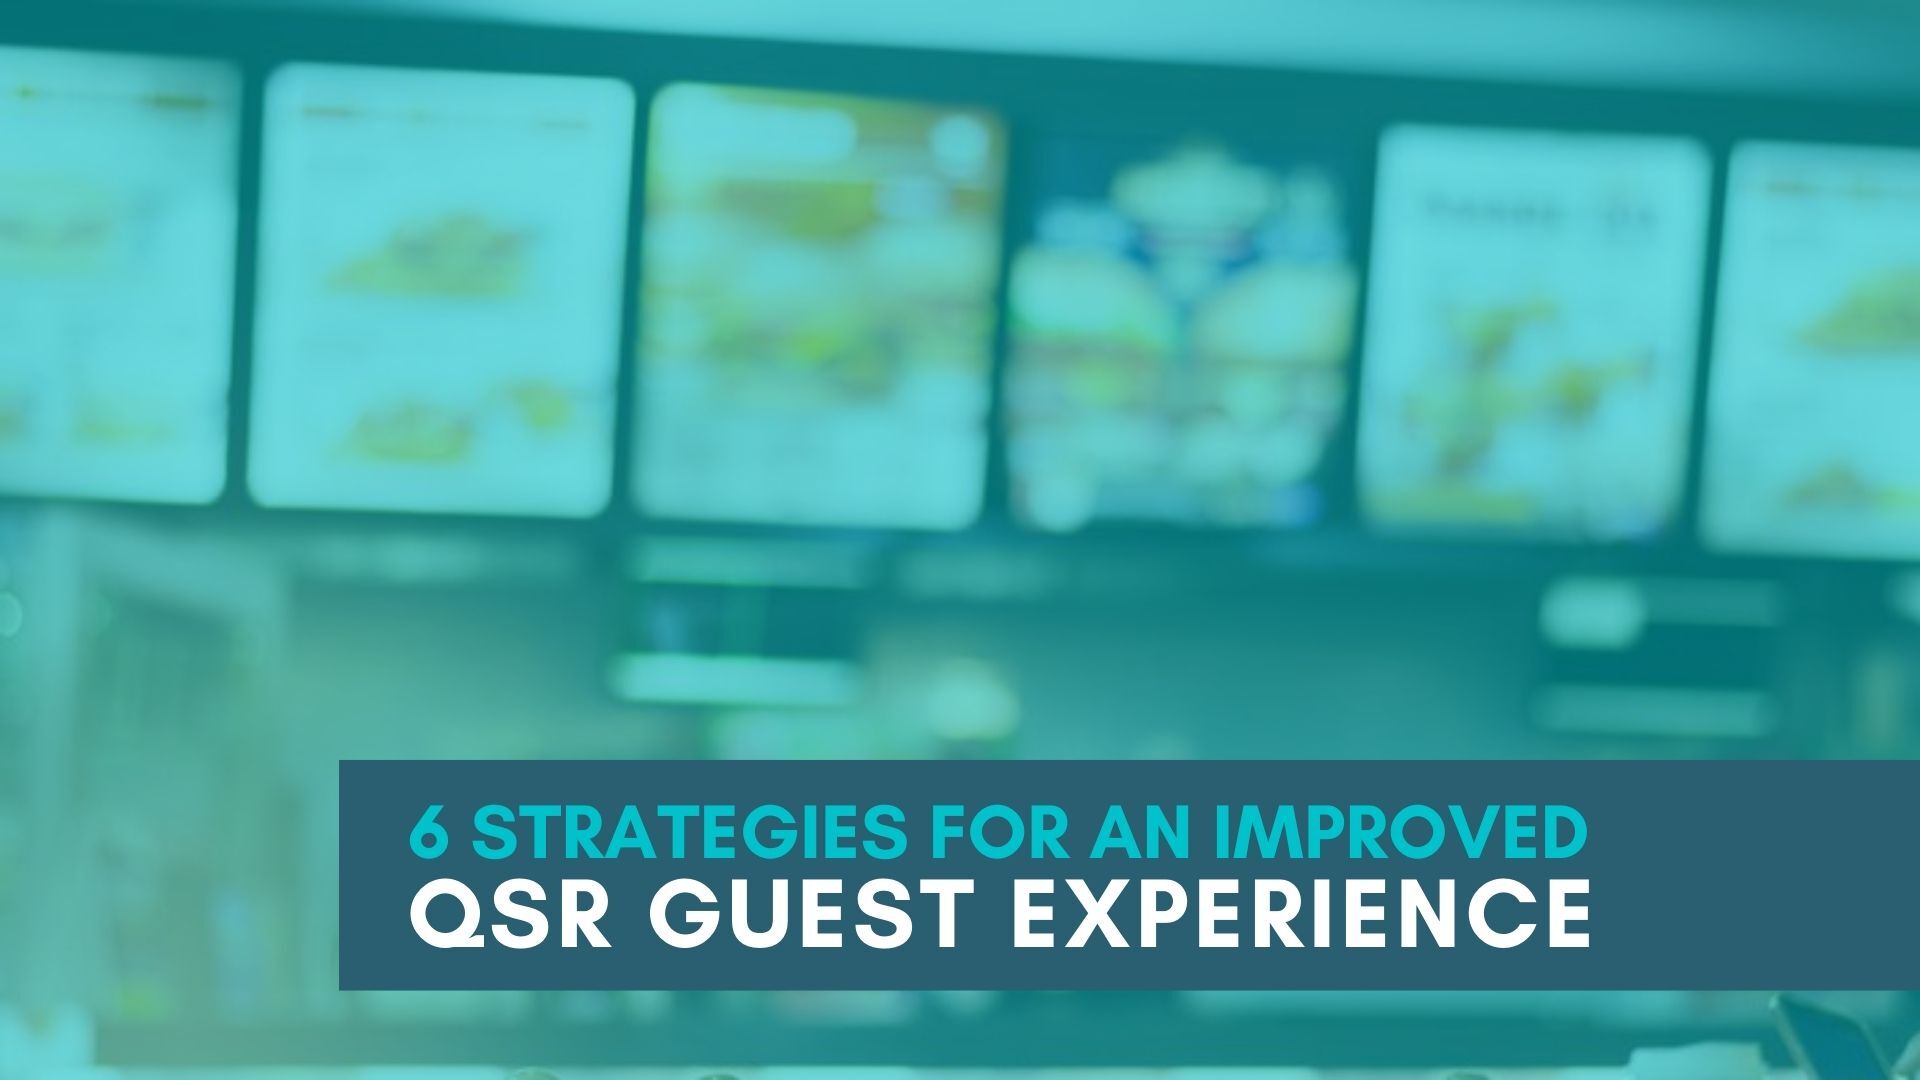 You are currently viewing 6 Strategies for an Improved QSR Guest Experience